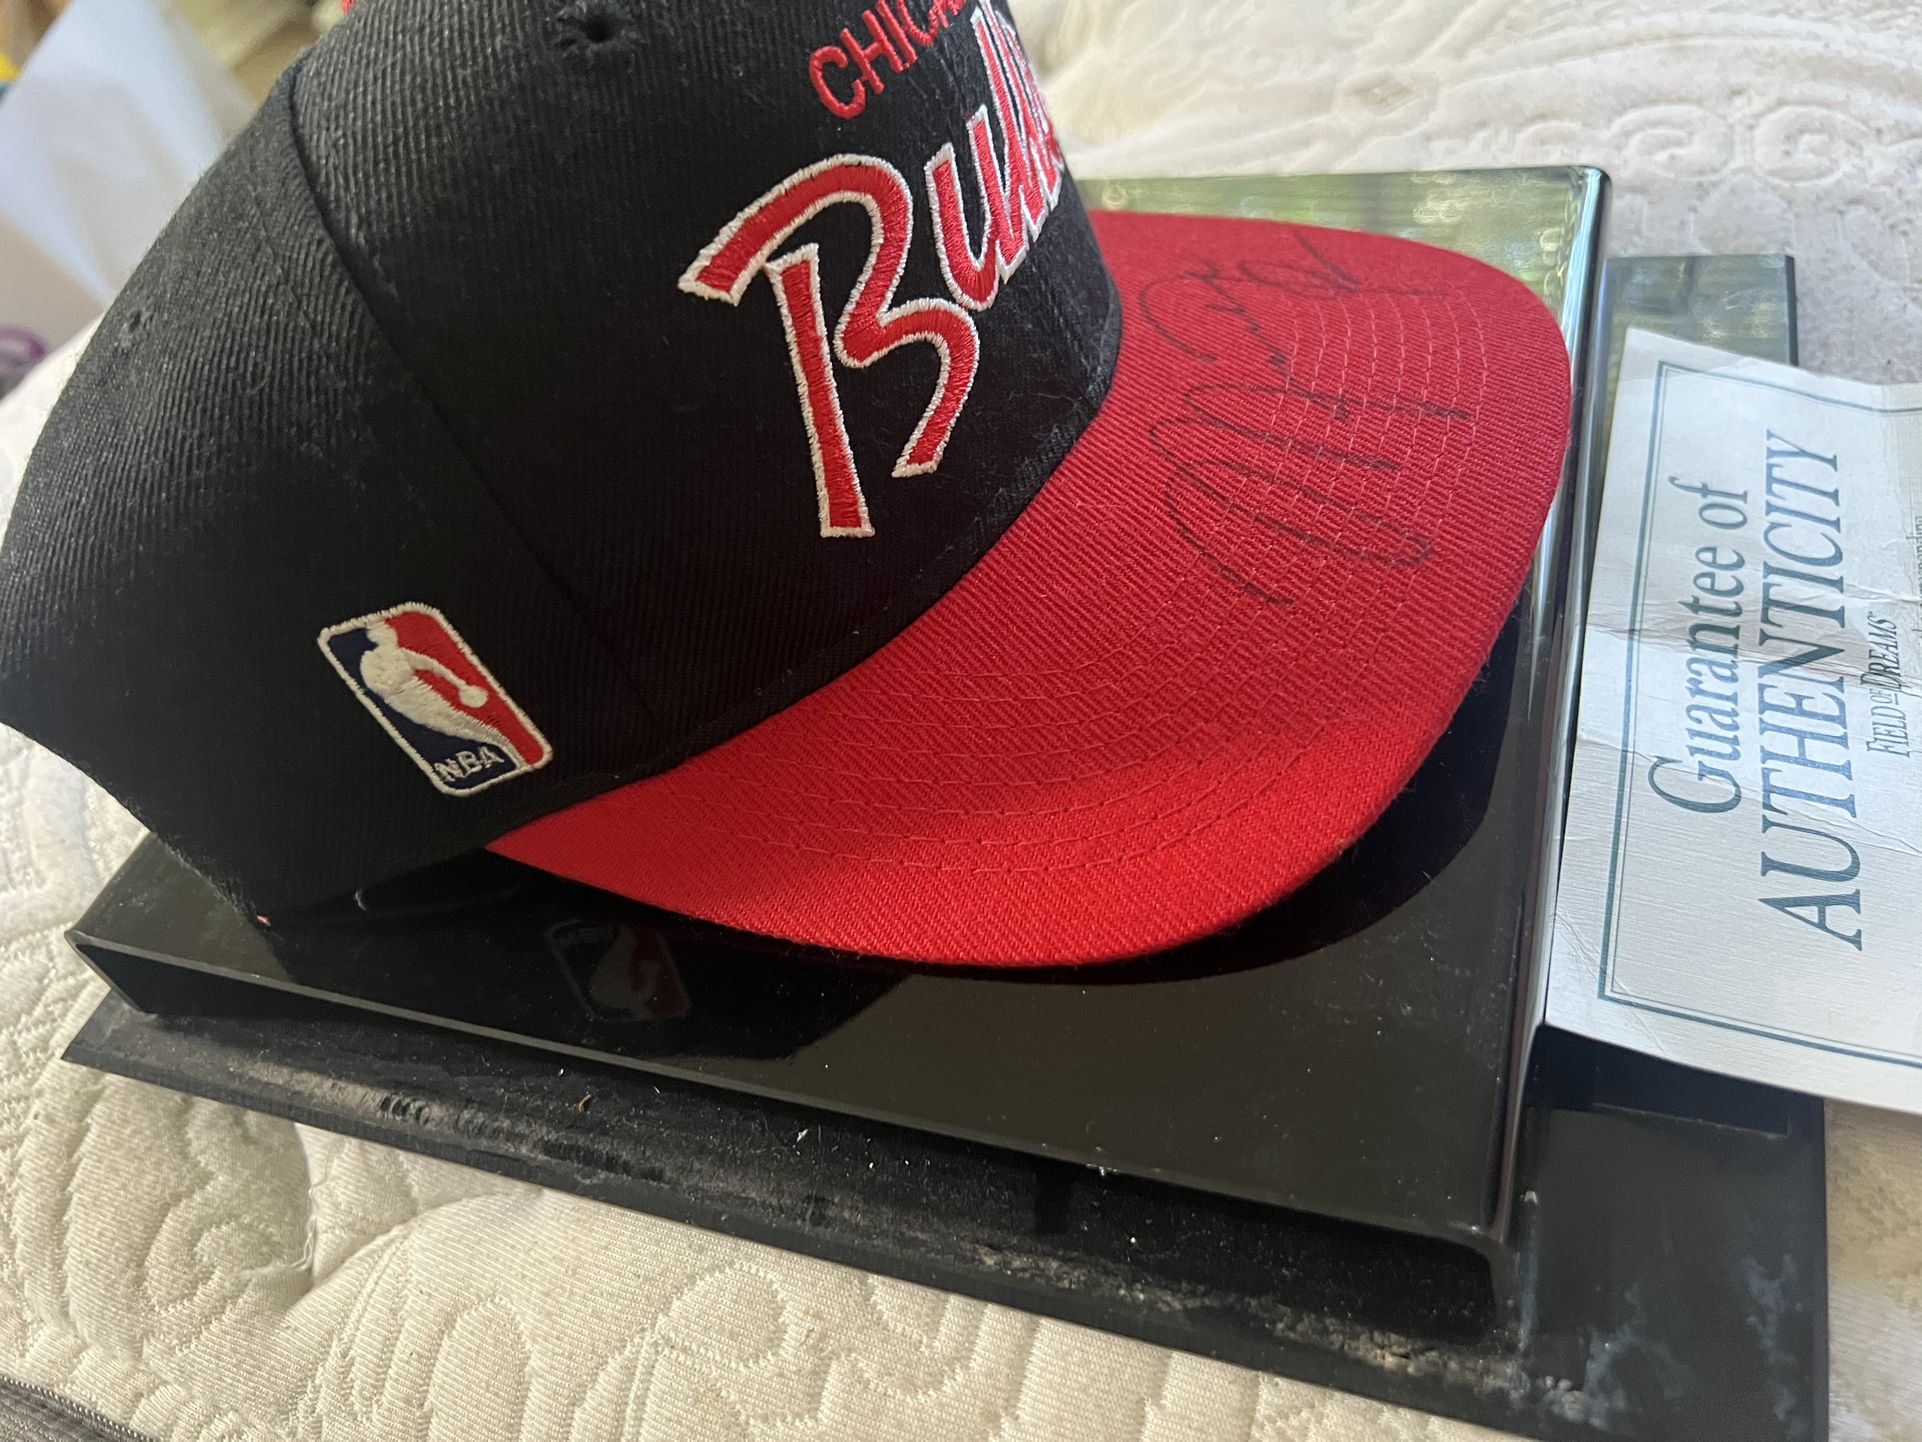 1996 & 1997 Chicago Bulls Hats for Sale in Los Banos, CA - OfferUp